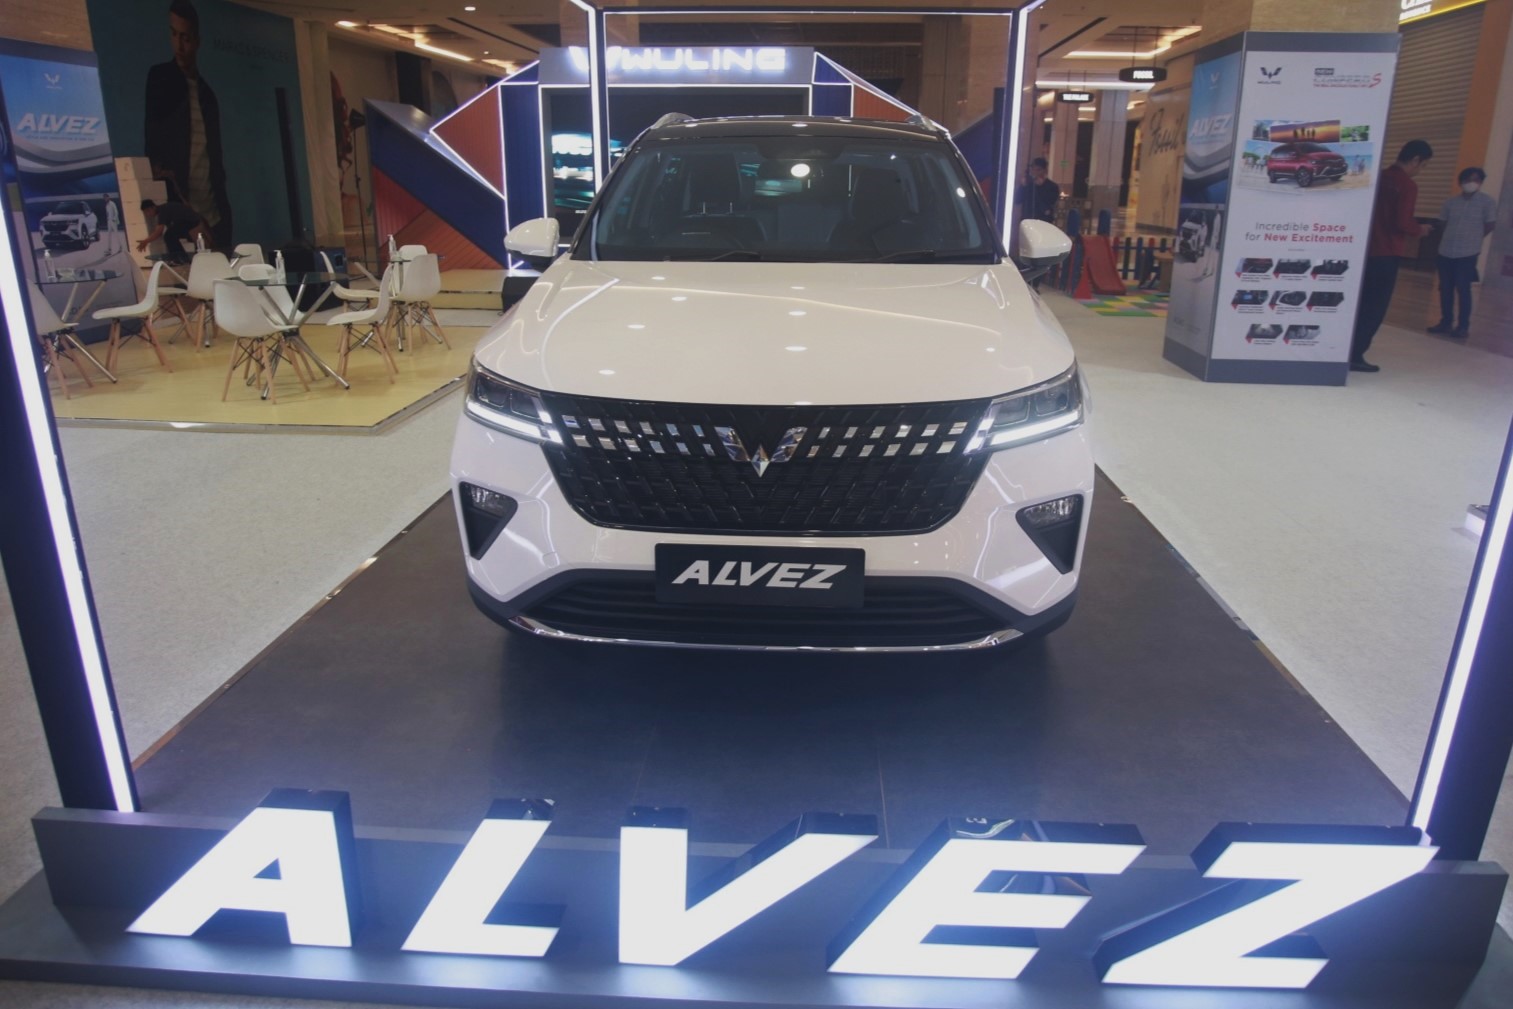 Image Wuling Resmi Meluncurkan Alvez, ‘Style and Innovation in One SUV’ di Yogyakarta